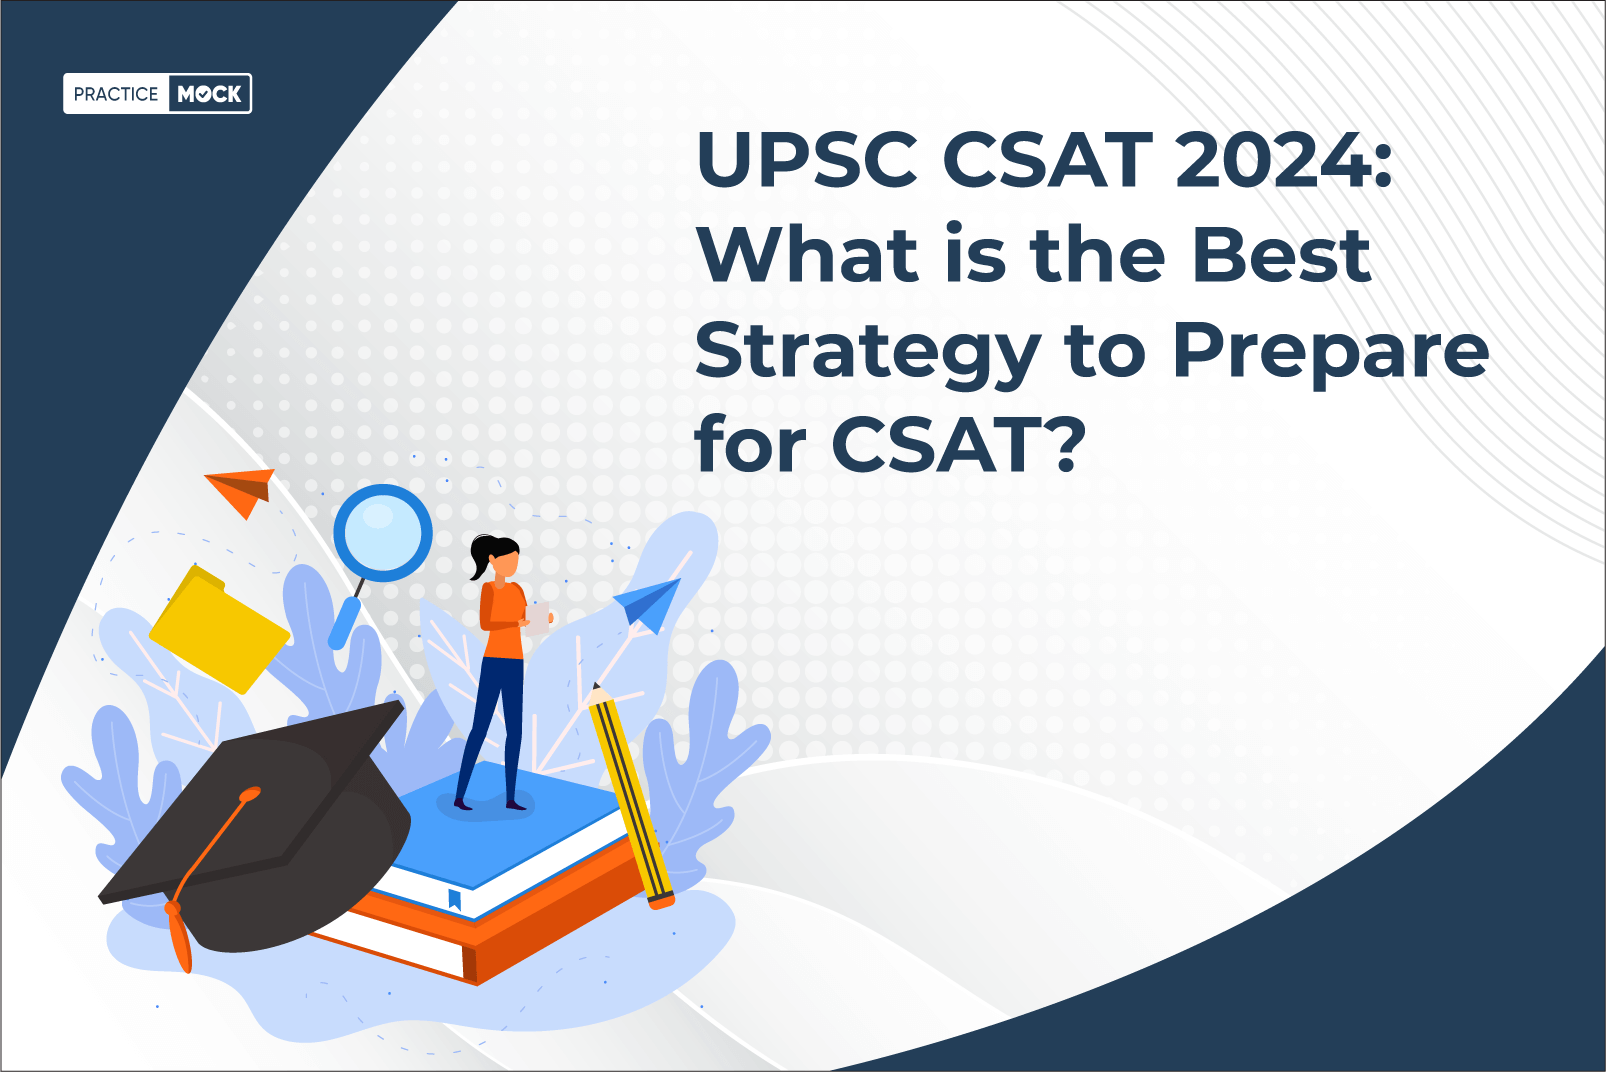 UPSC CSAT 2024 What is the Best Strategy to Prepare for CSAT